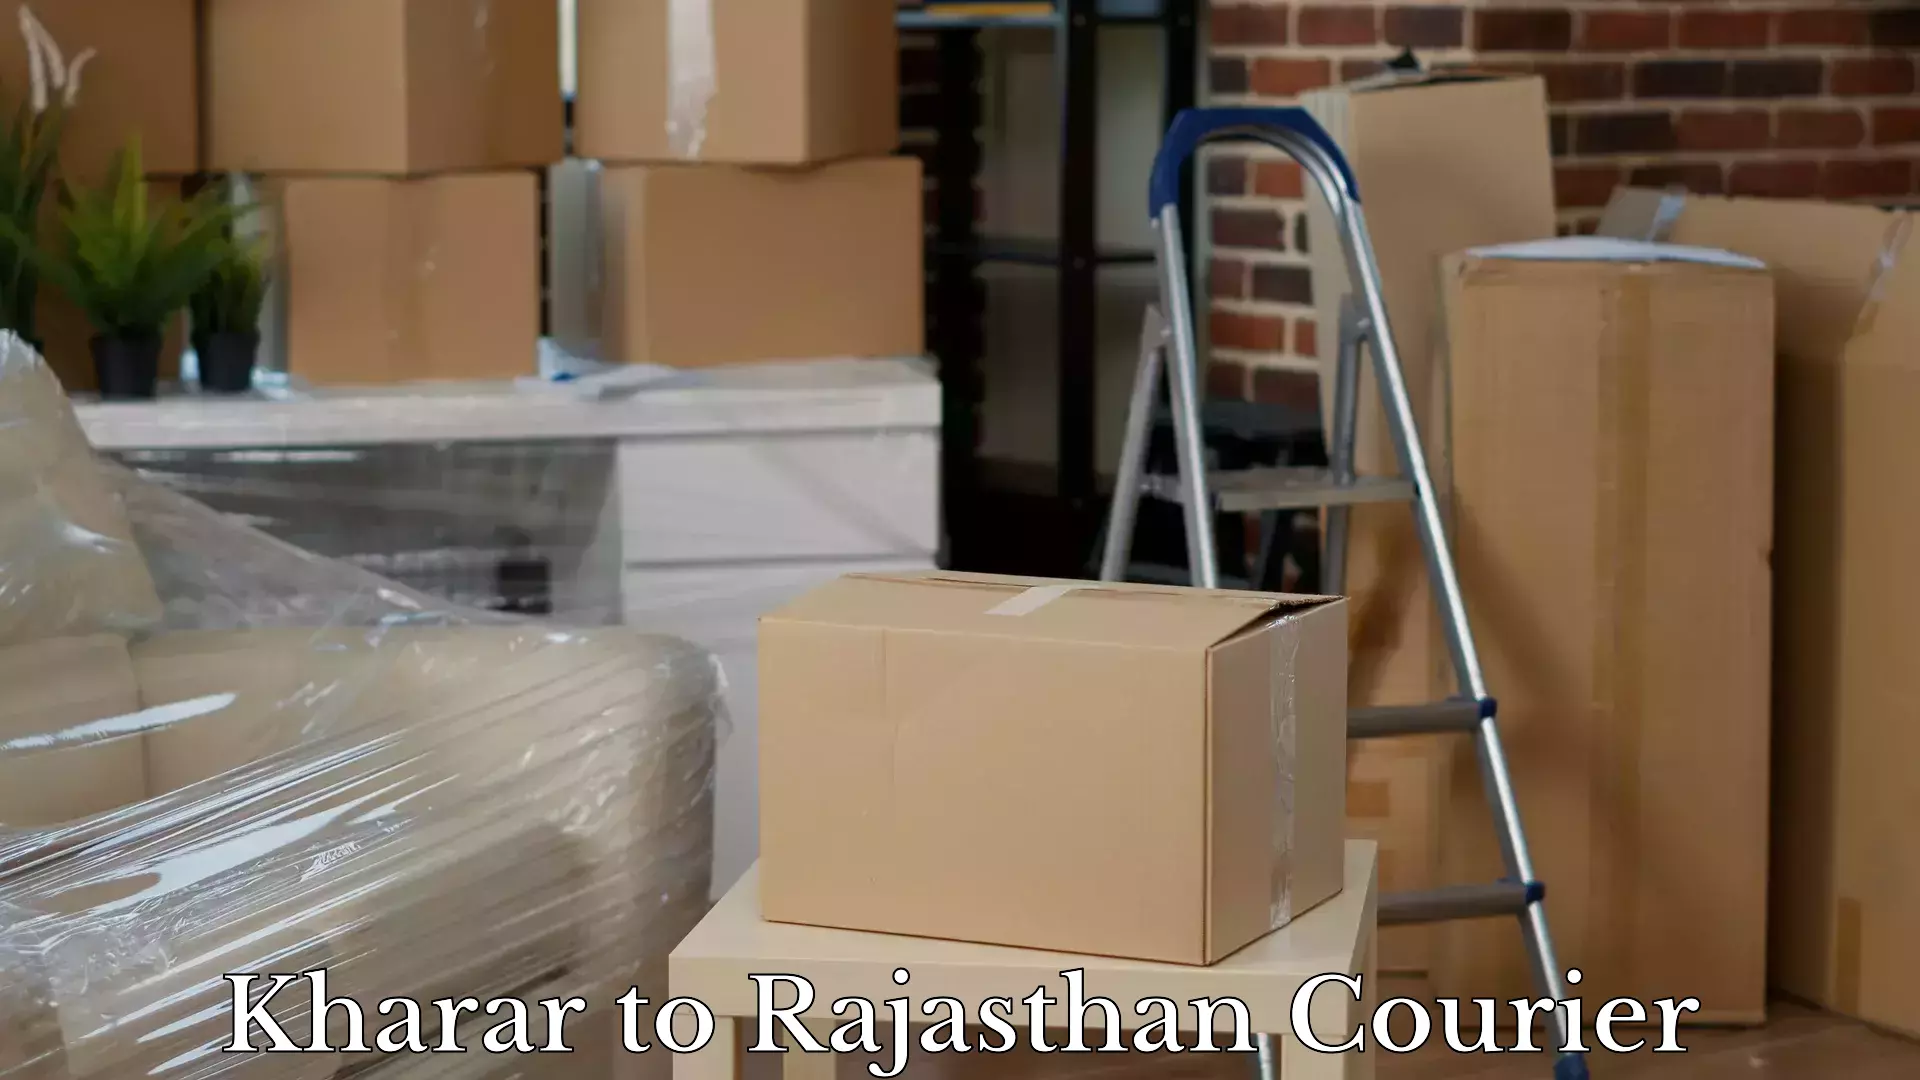 Instant baggage transport quote Kharar to Rajasthan